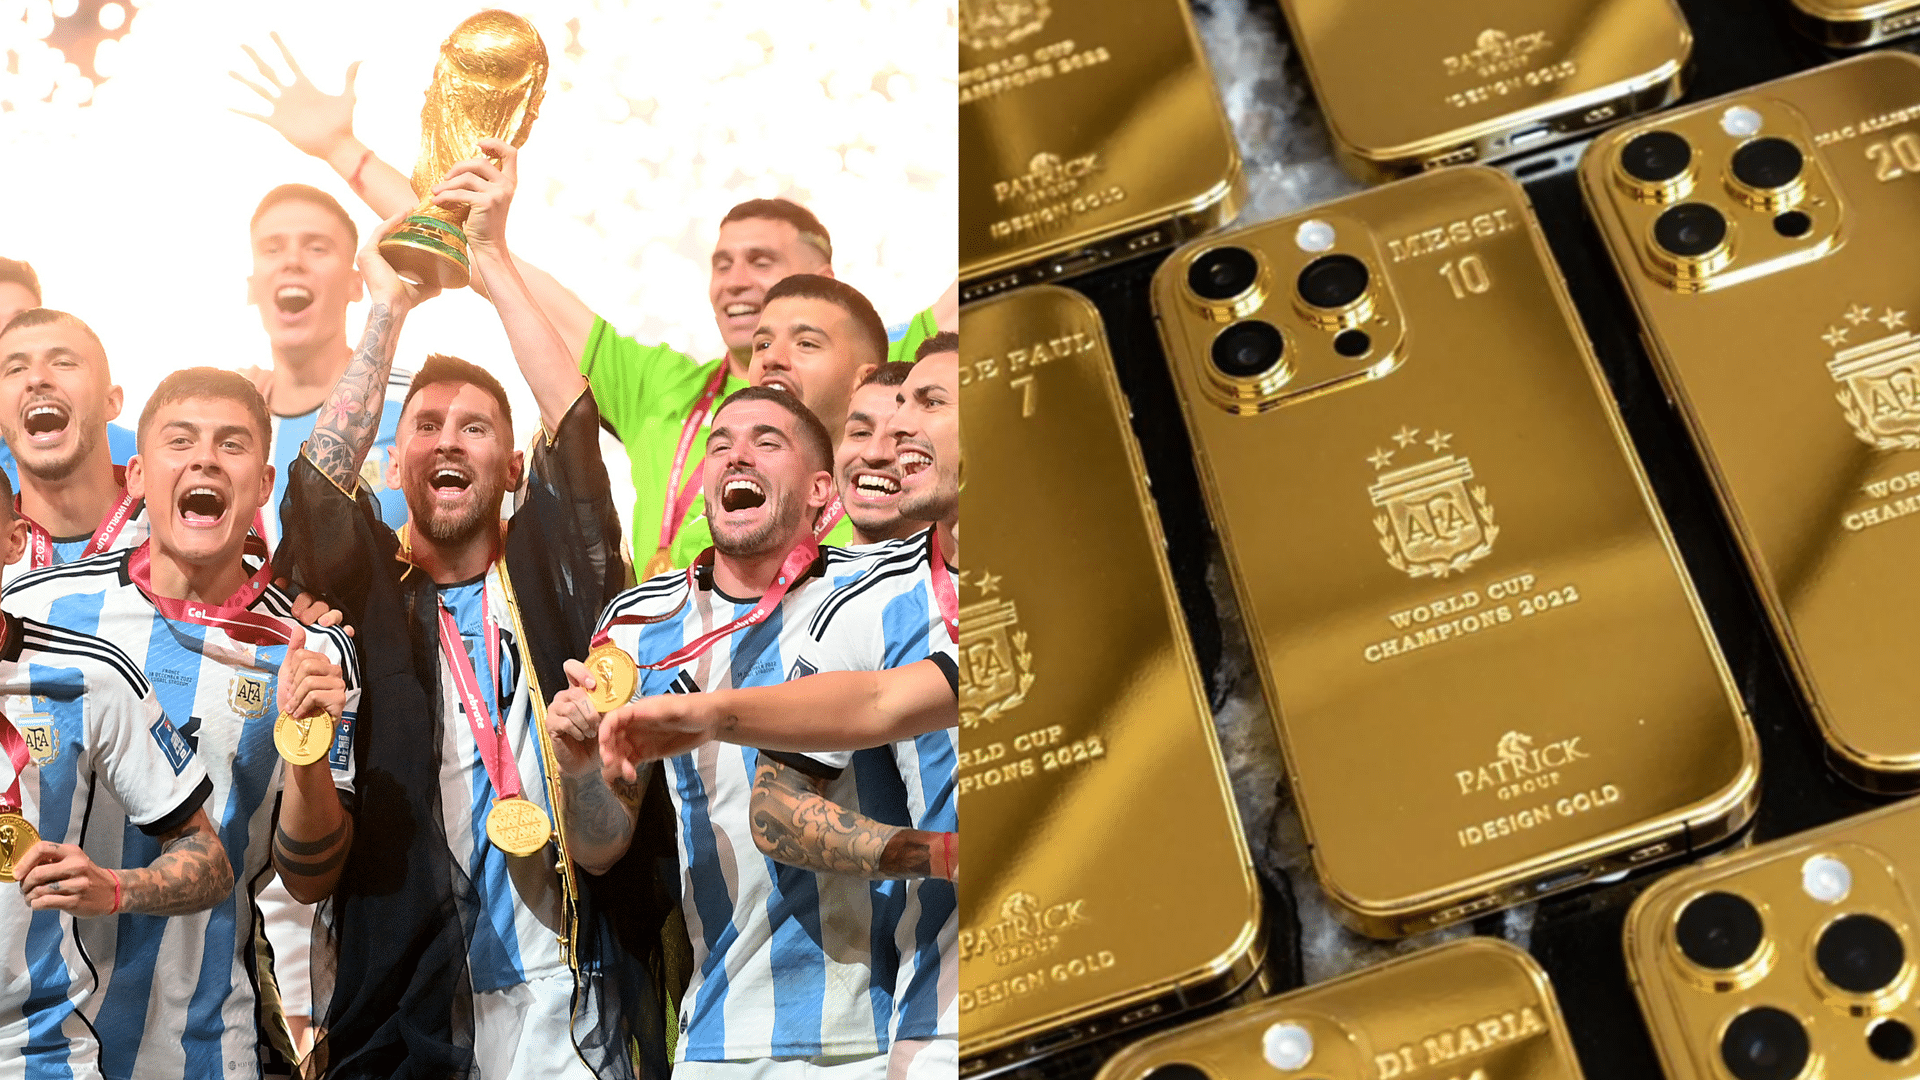 Lionel Messi Orders 35 Gold iPhone Devices To His Team Members and Staff of Argentina Team